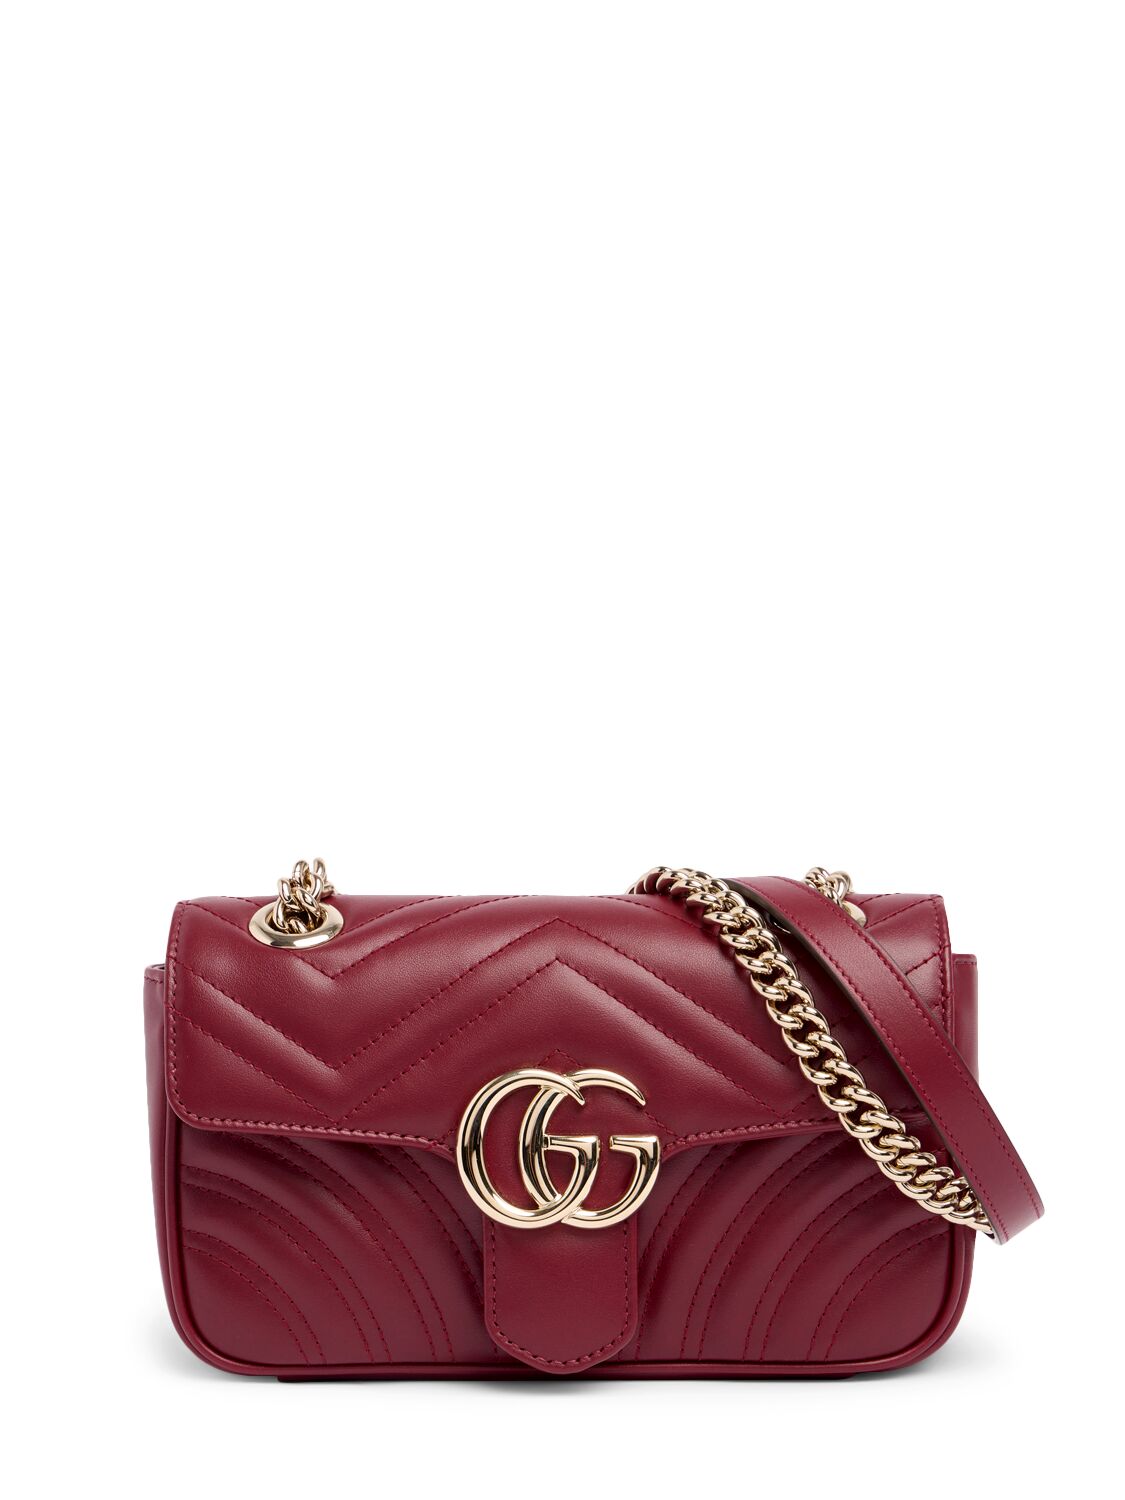 Gucci Gg Marmont Leather Shoulder Bag In Rosso Ancora